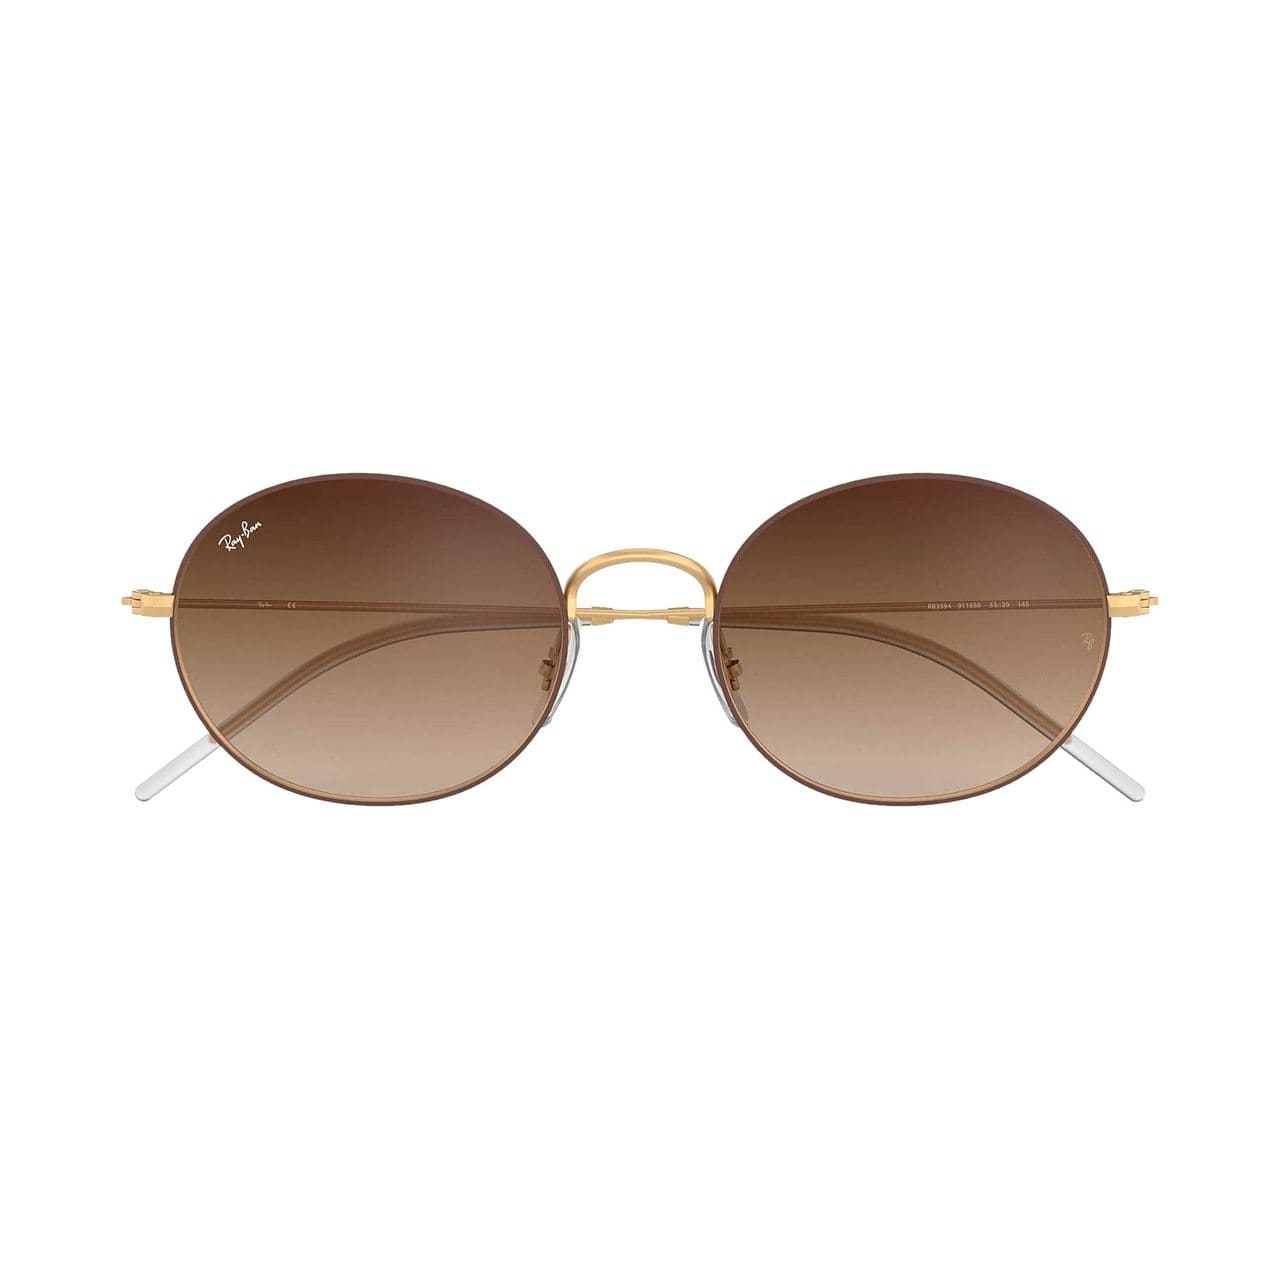 Ray-Ban RB3594-9115S0 Beat Brown Gold Round Brown Gradient Mirror Lens Sunglasses 8053672929072